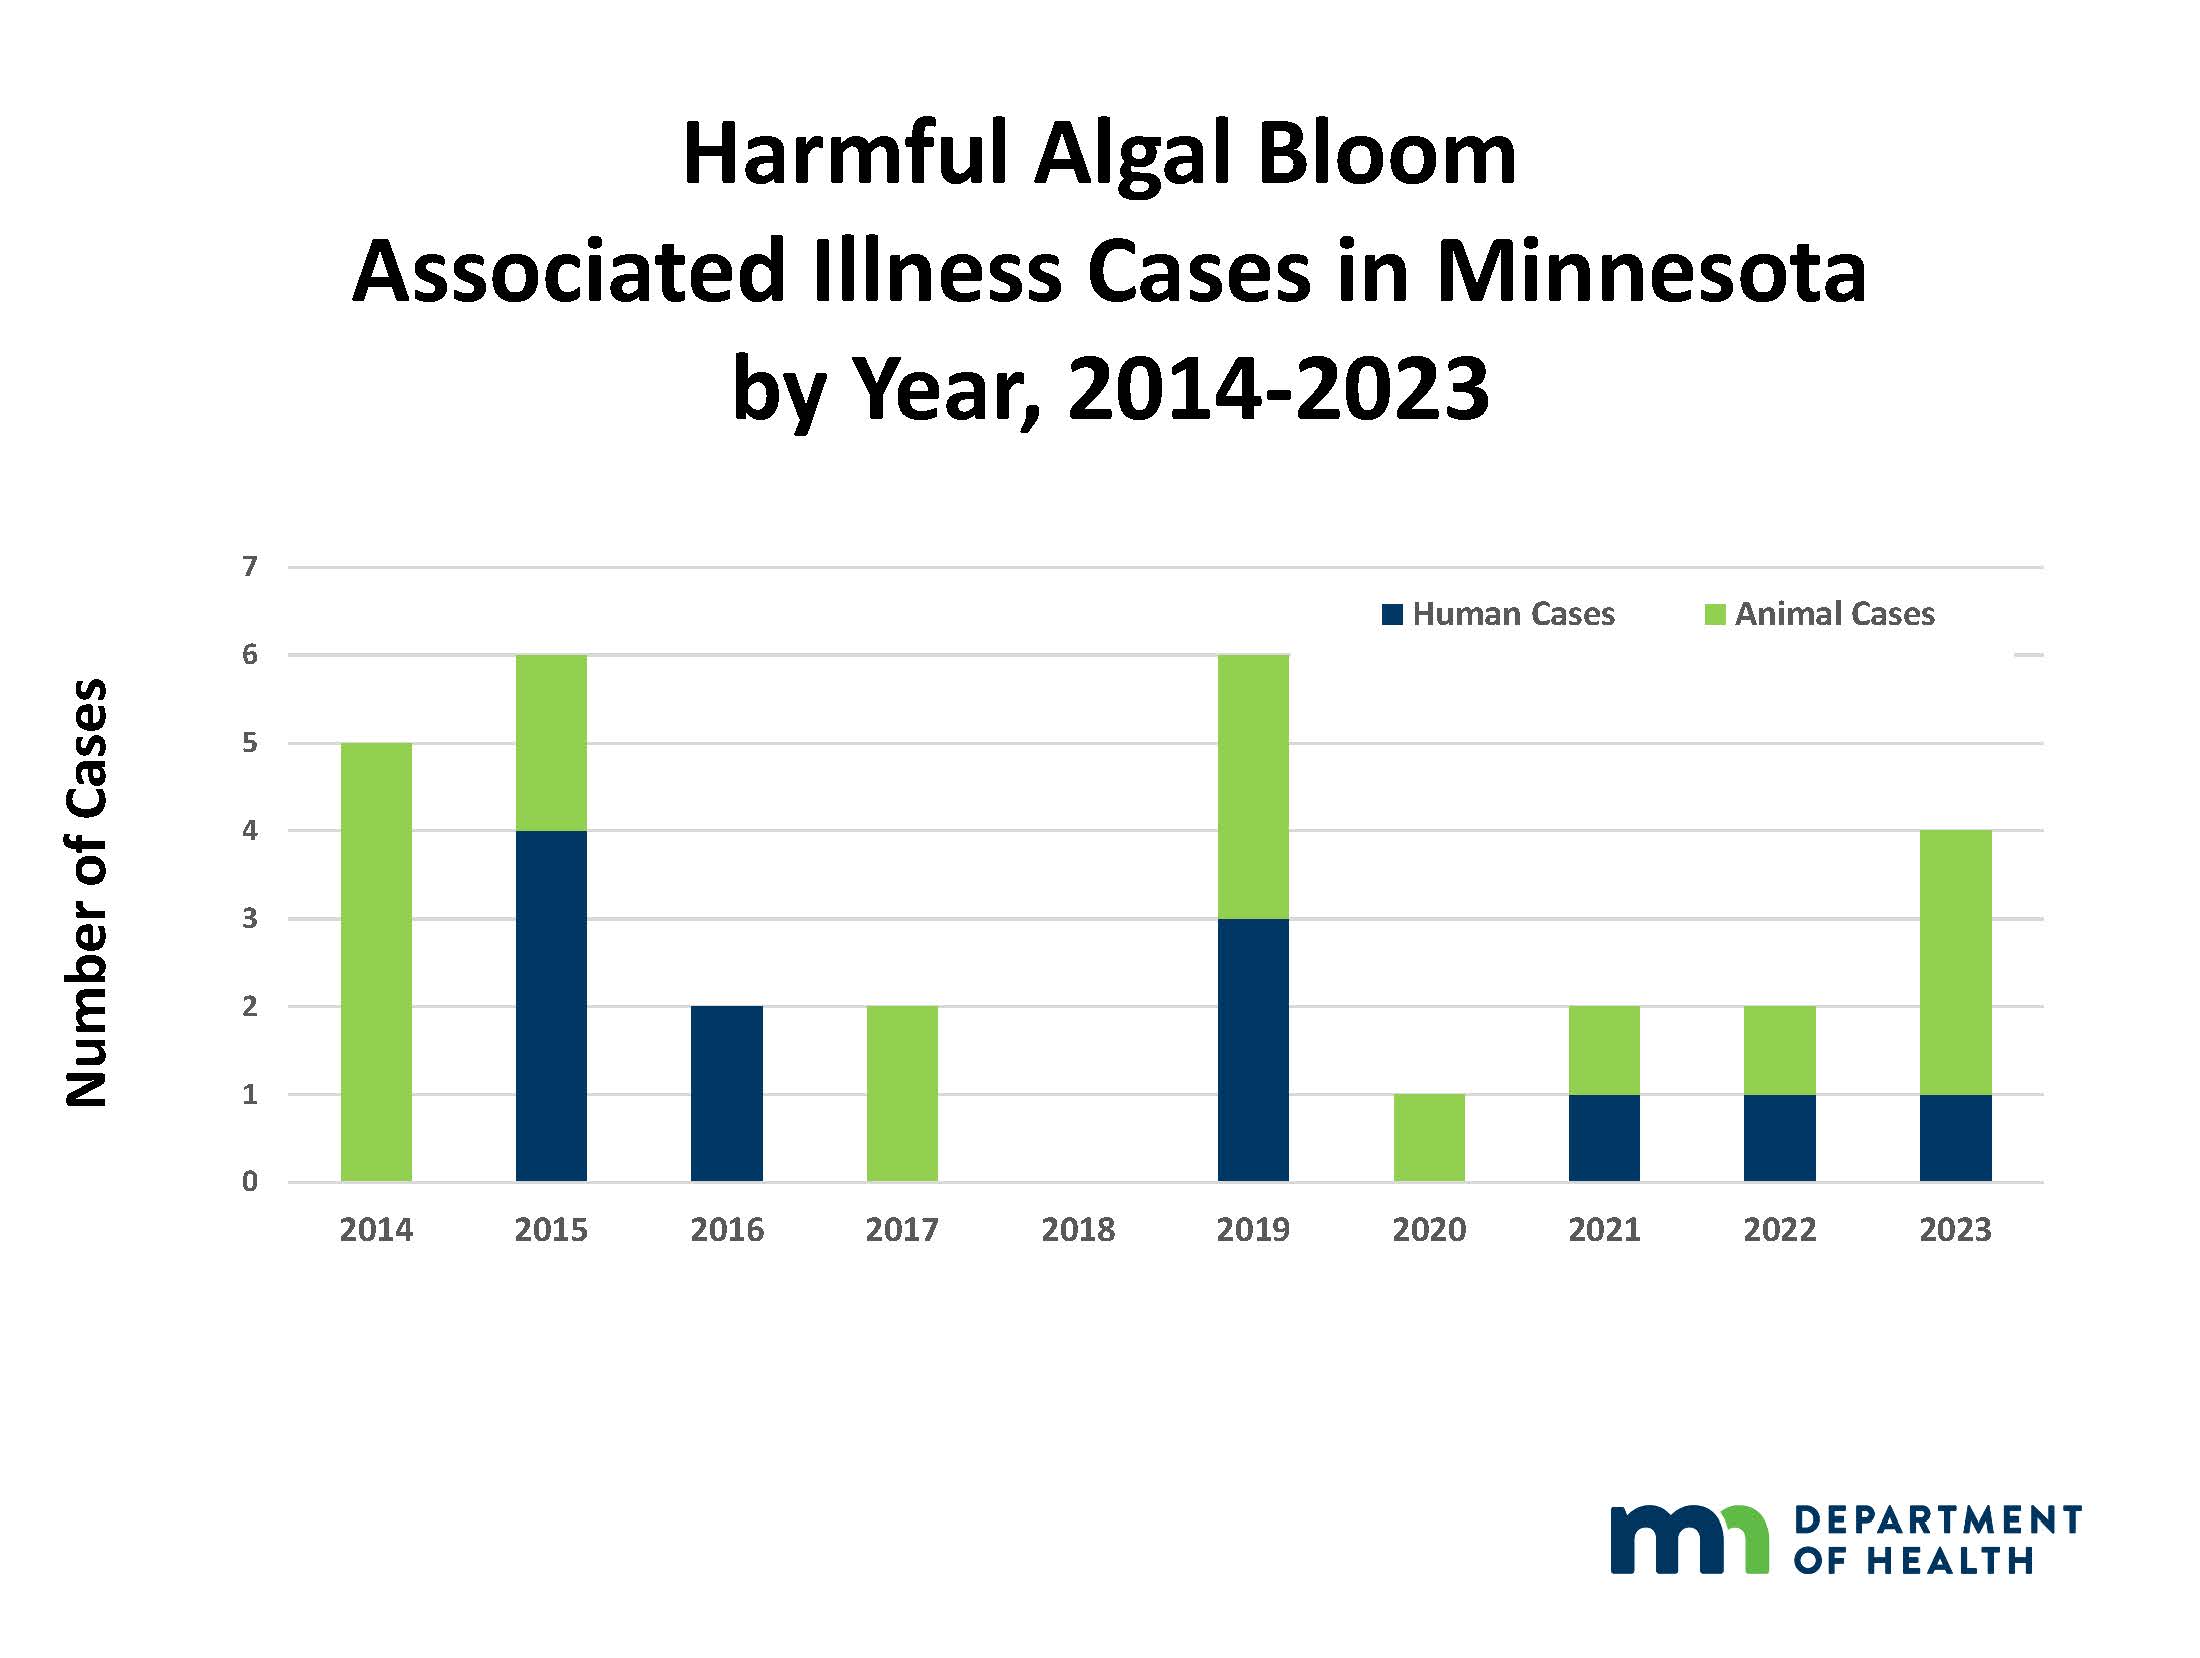 HAB-Associated Illness Cases in Minnesota by Year, 2014-2022